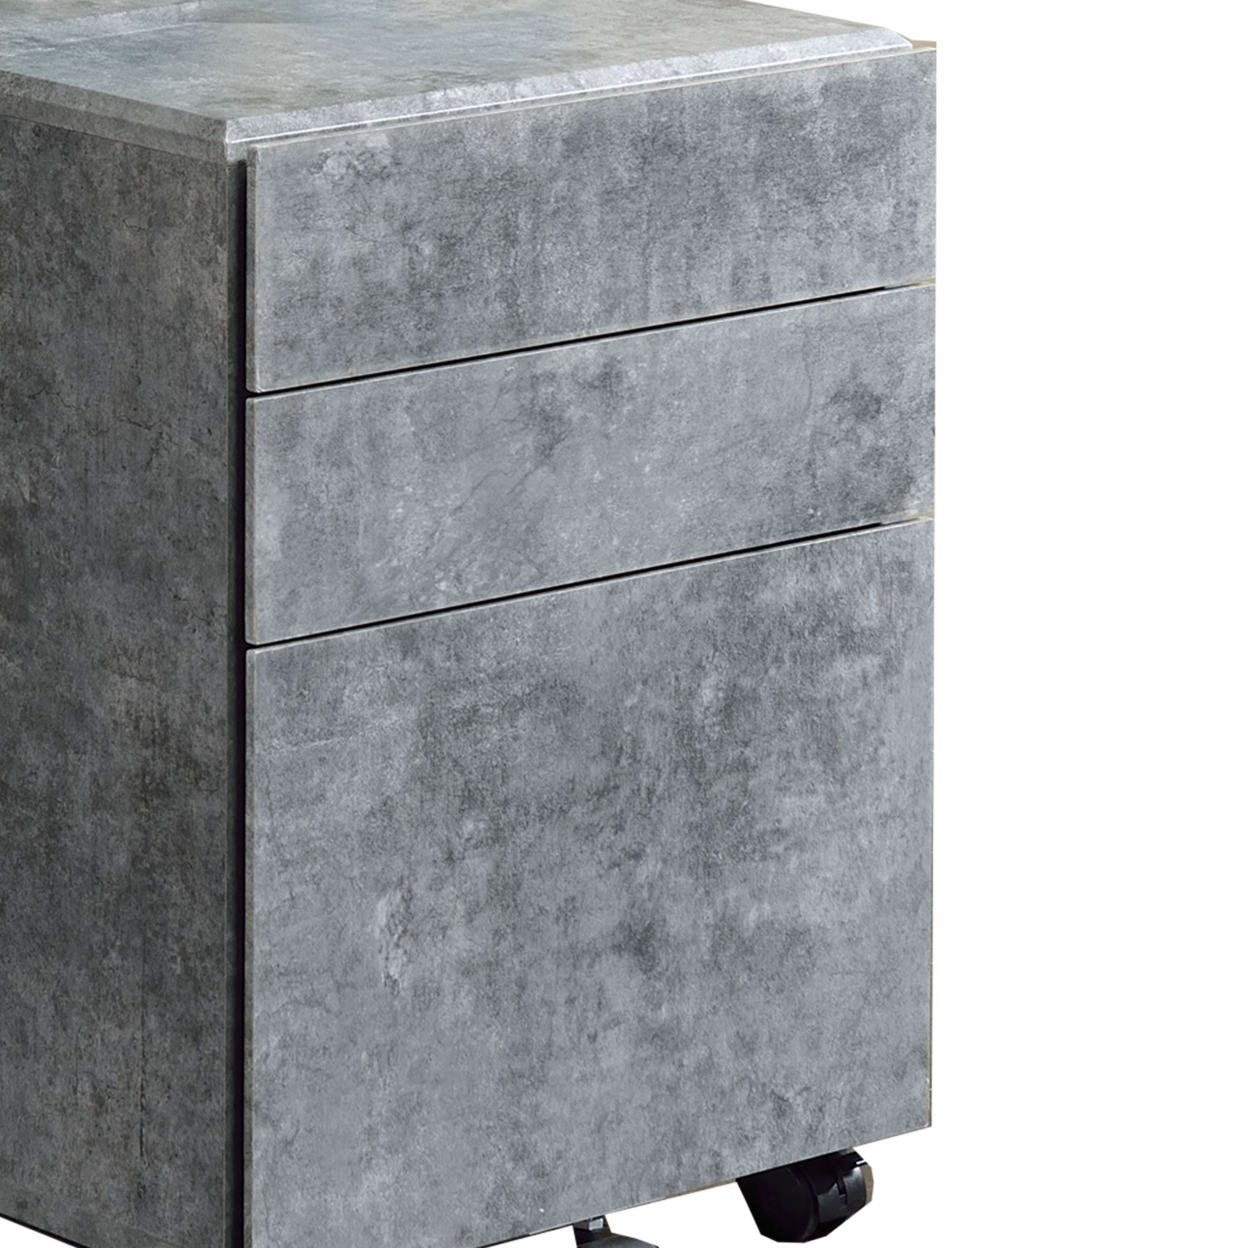 Contemporary Style File Cabinet With 3 Storage Drawers And Casters, Gray- Saltoro Sherpi